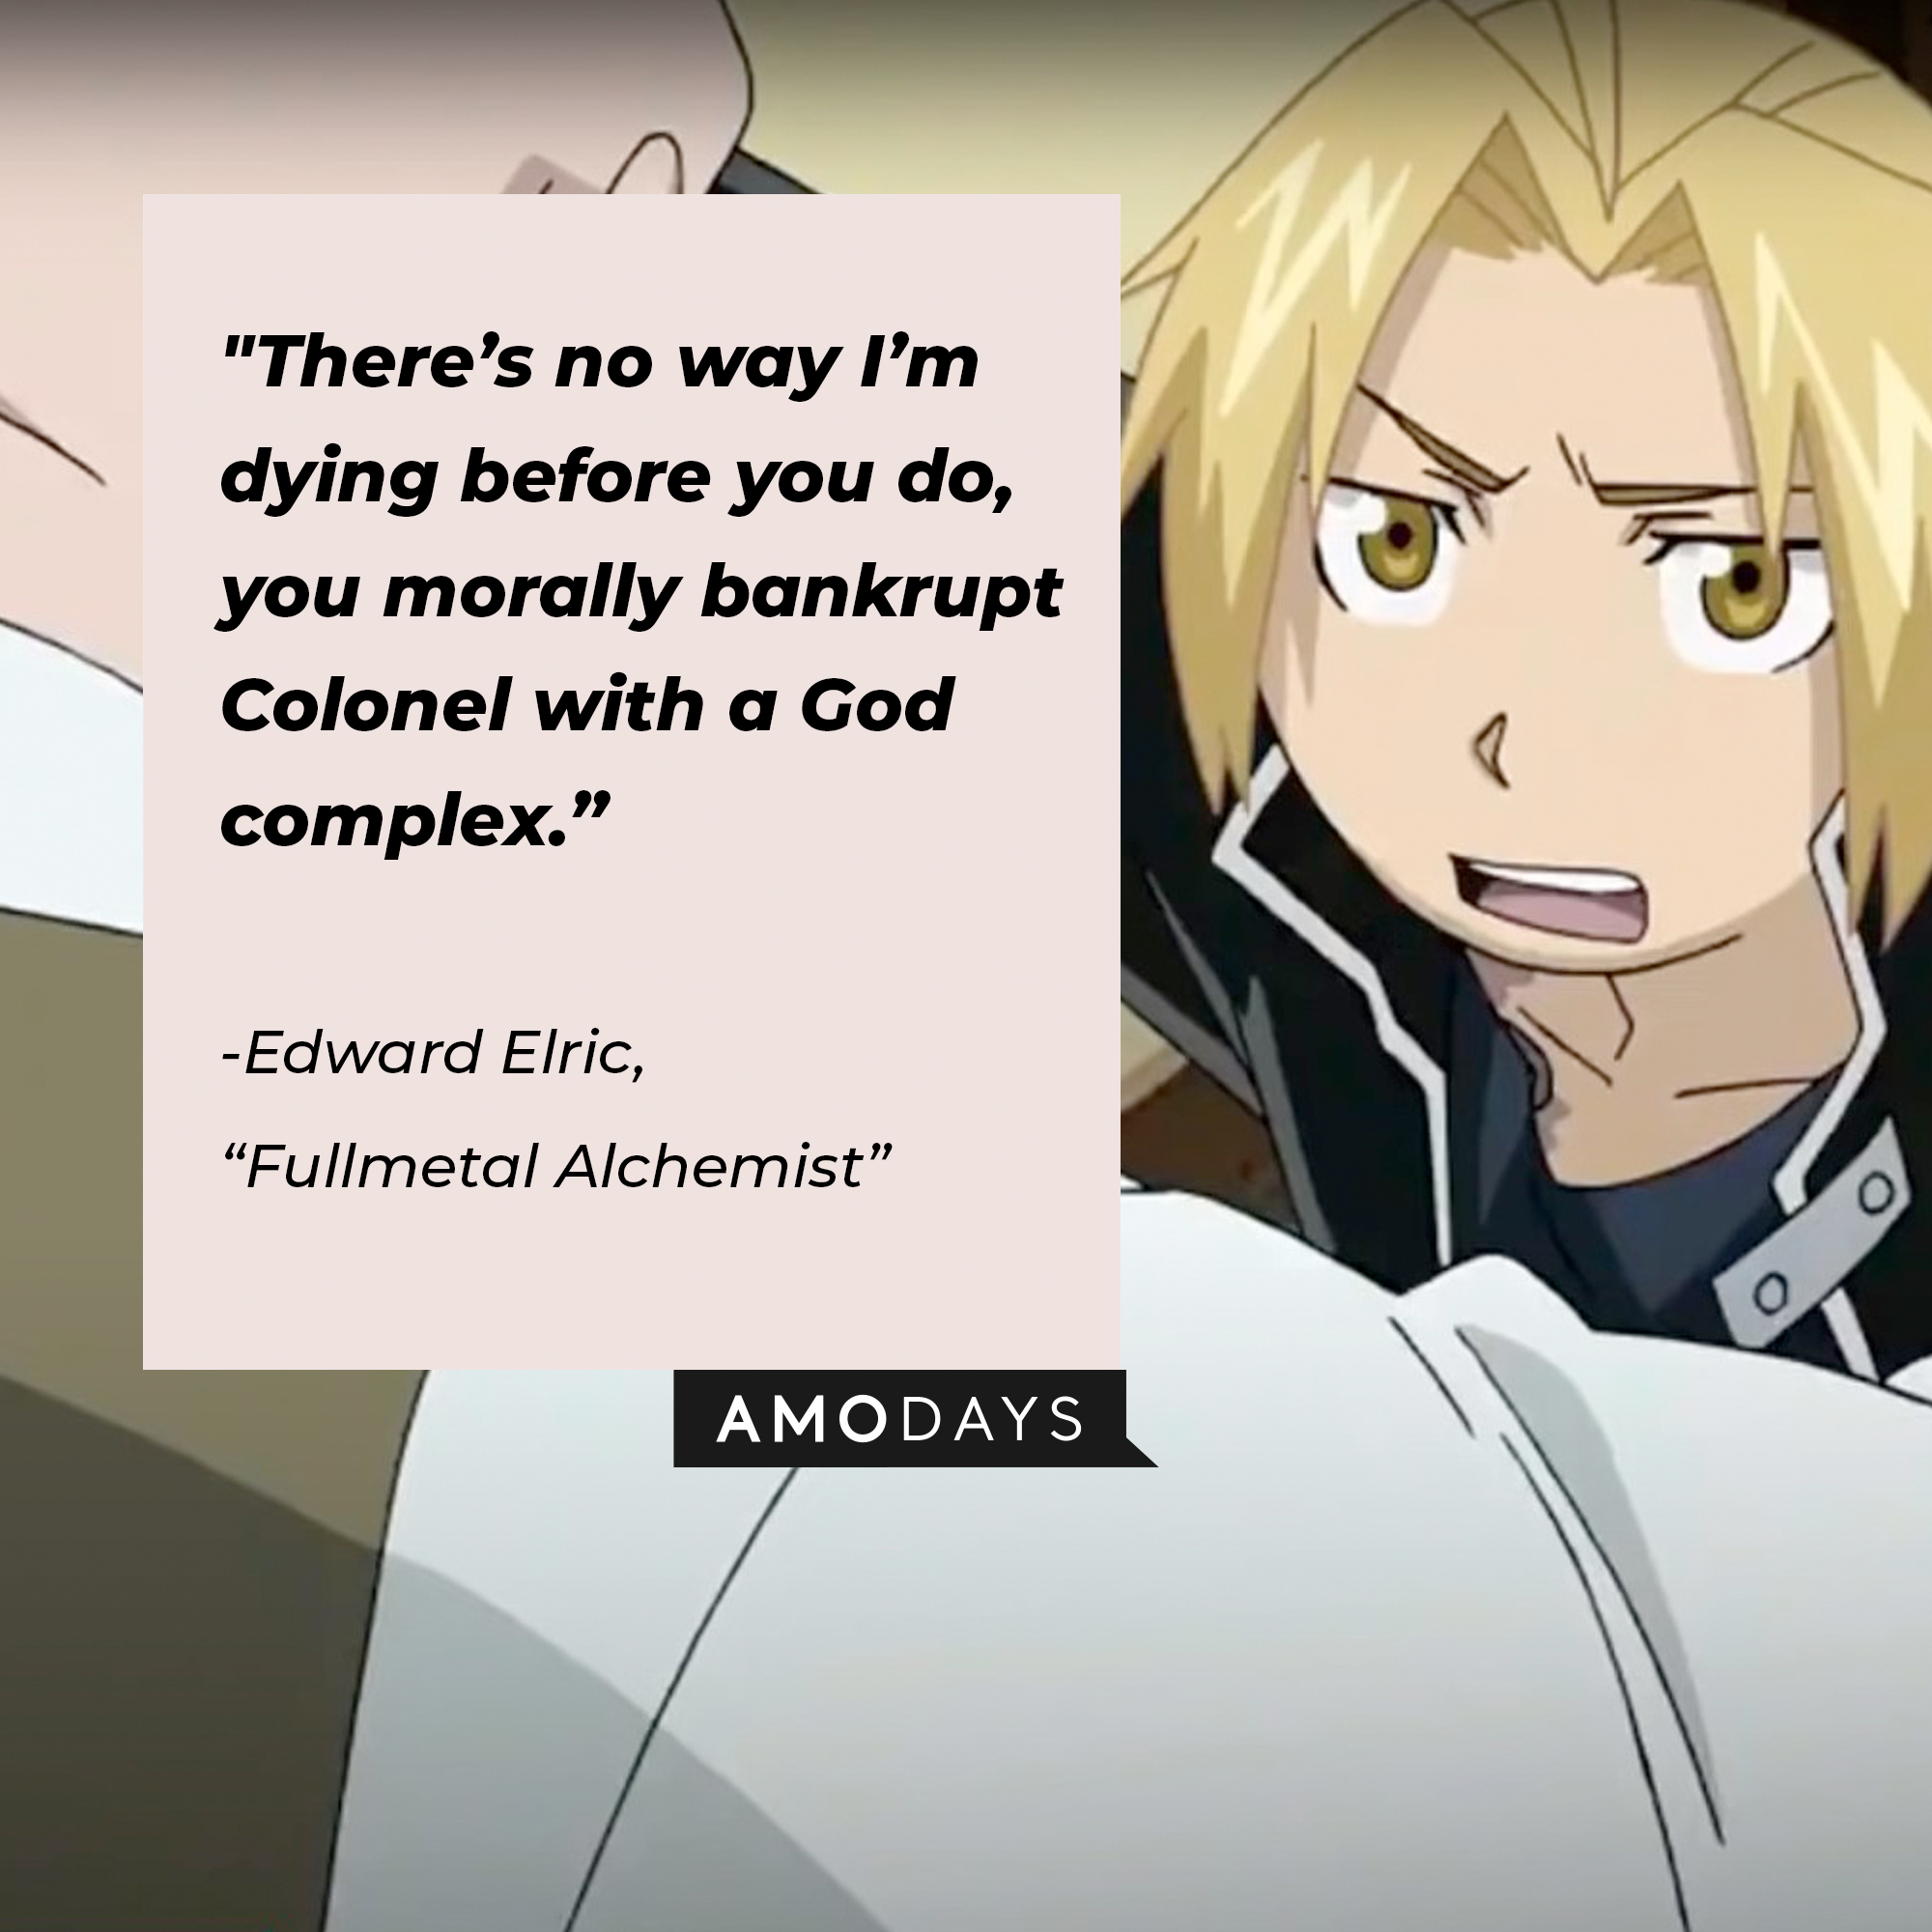 Edward Elric's quote: "There’s no way I’m dying before you do, you morally bankrupt Colonel with a God complex.” | Image: facebook.com/FMAHiromuArakawa